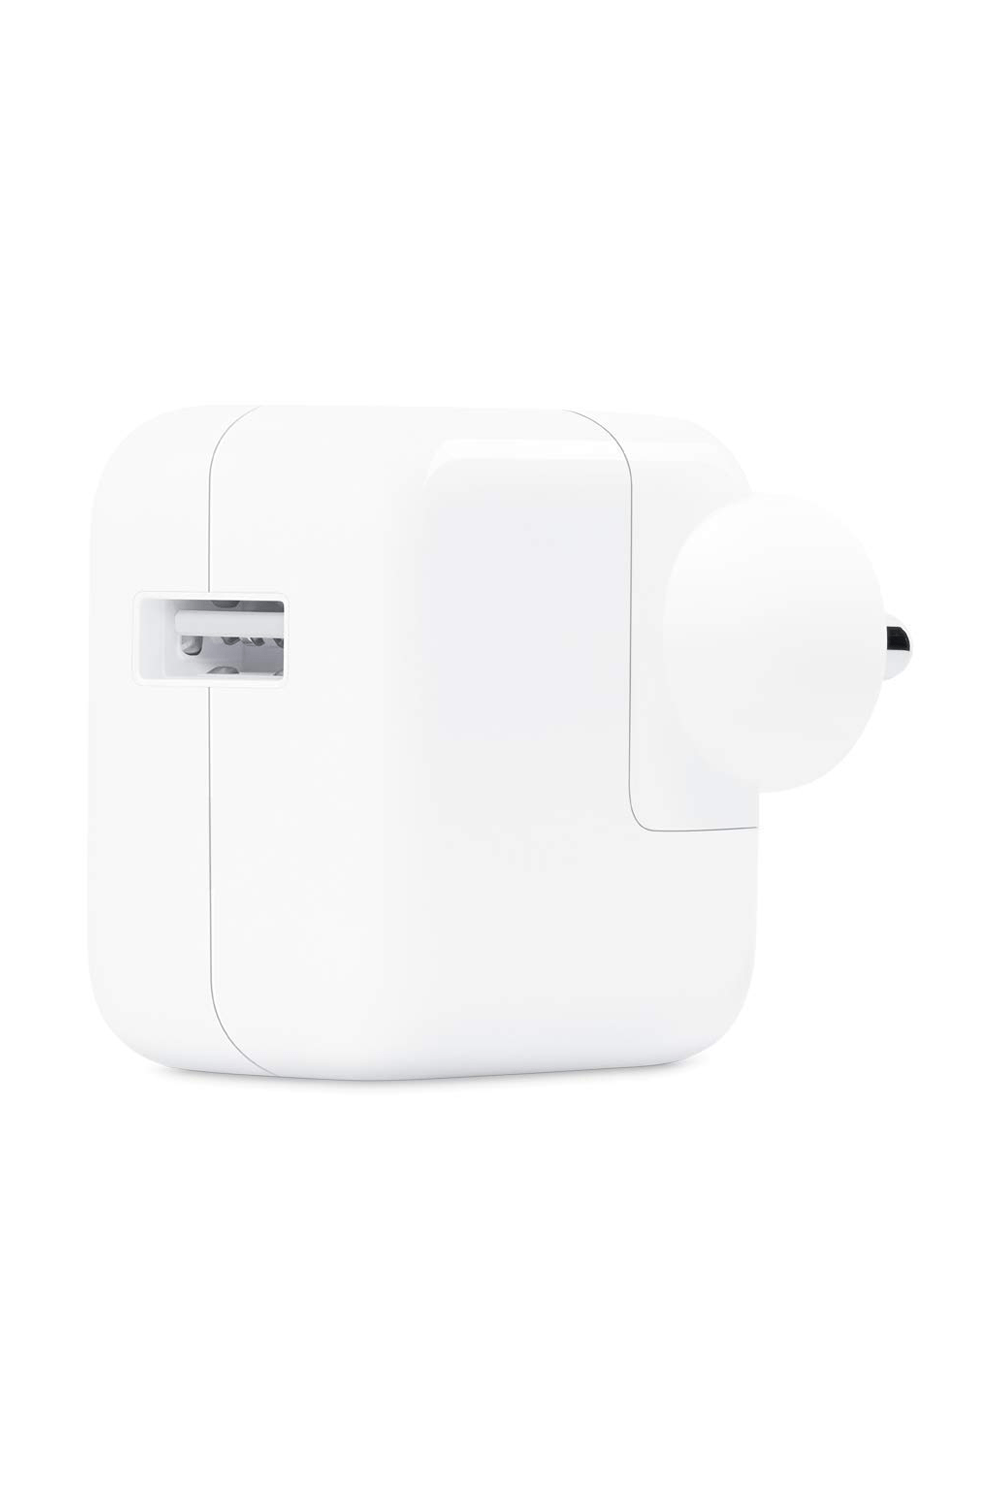 Apple 12W USB Power Adapter - QuickTech.in